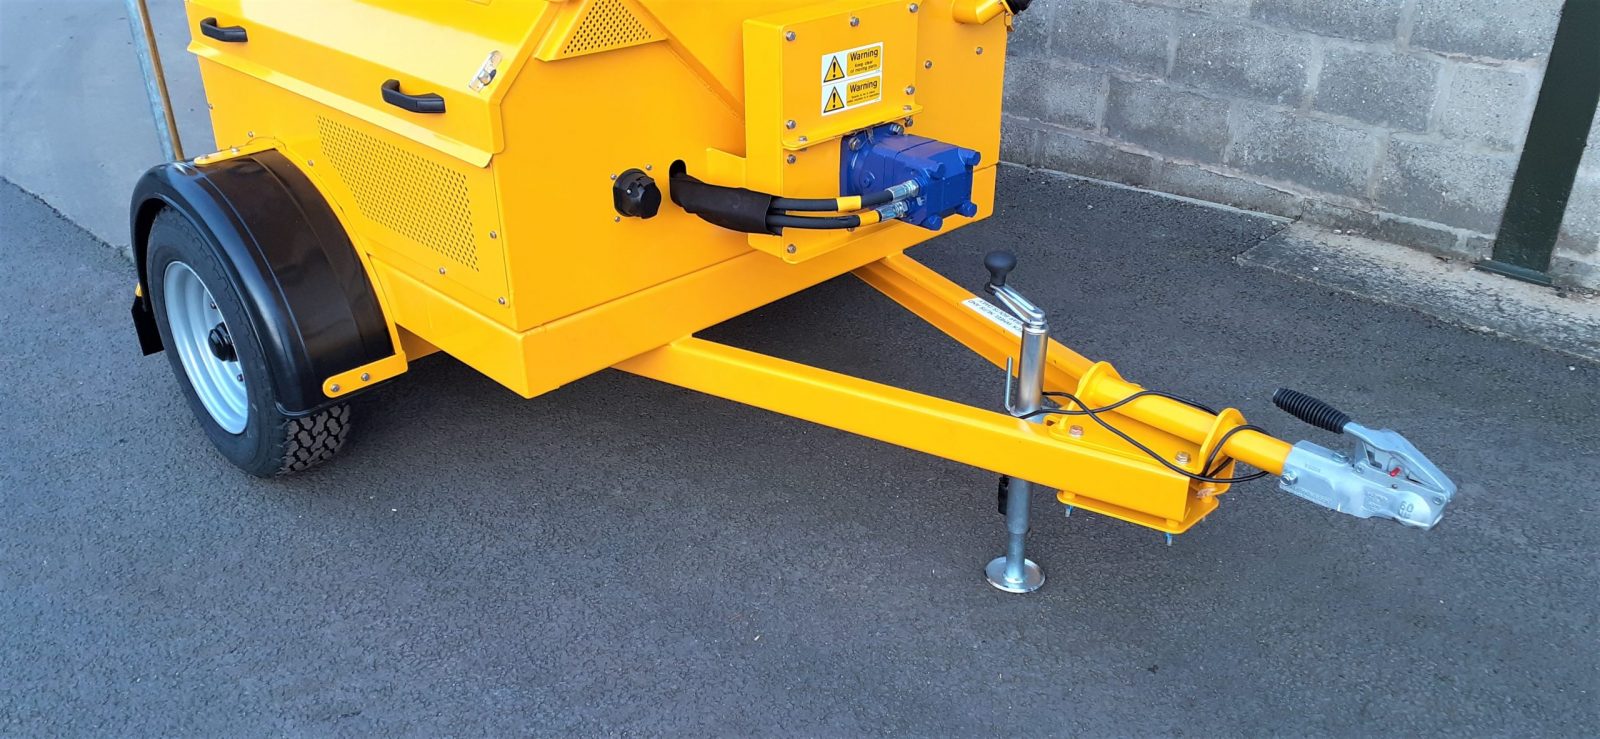 The TS800DC Tug-Towed Salt Spreader has a prop stand wheel with heavy duty road going wheels and tyres